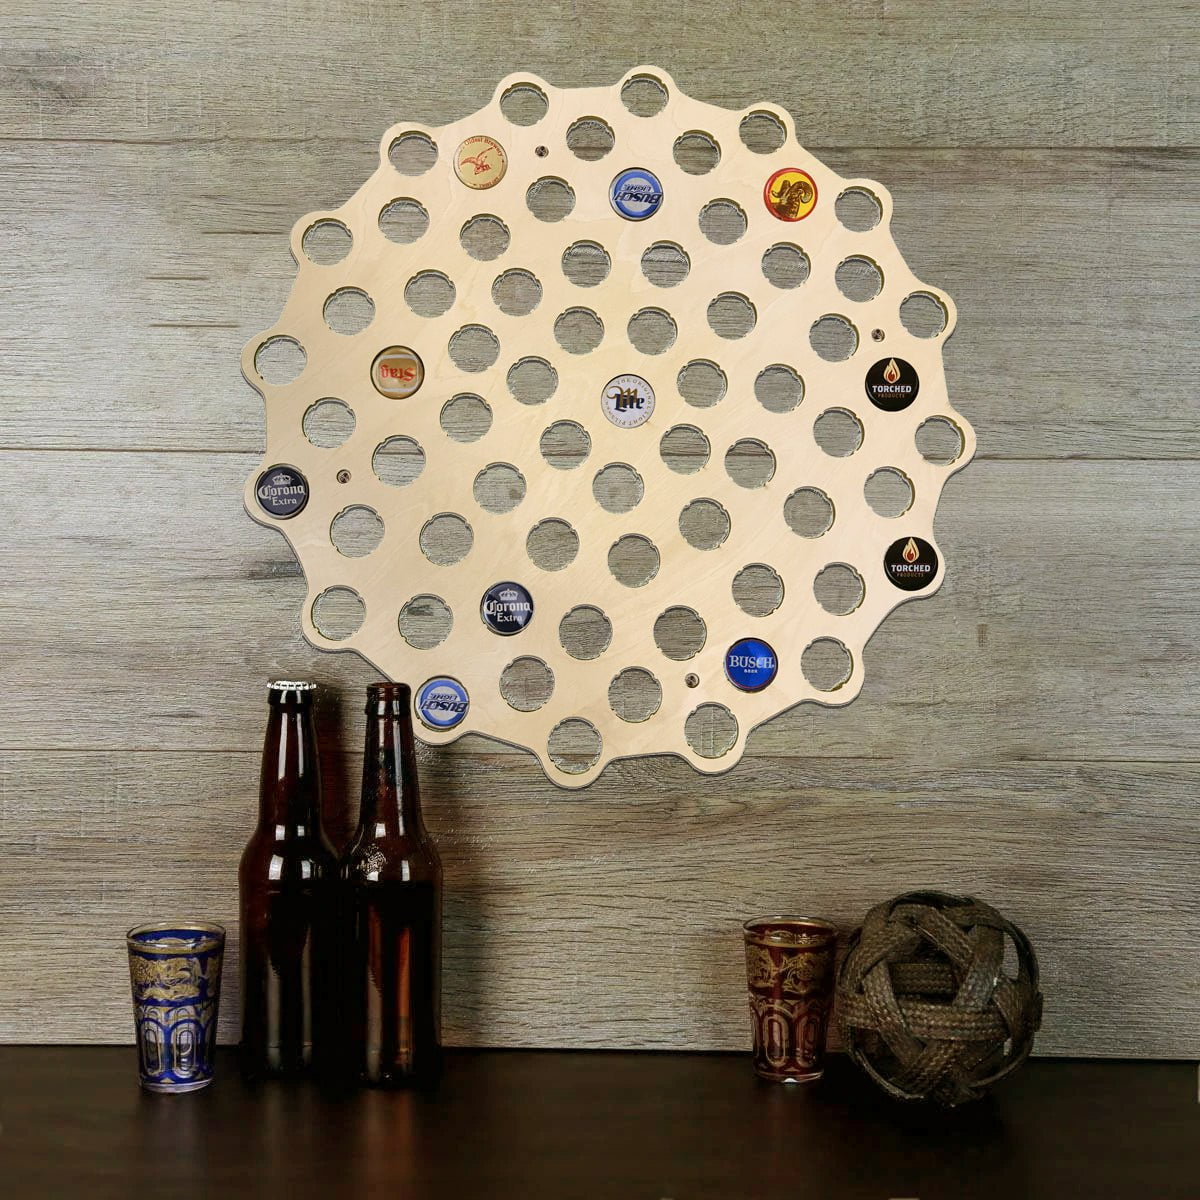 Torched Products Beer Cap Map Beer Bottle Cap Holder